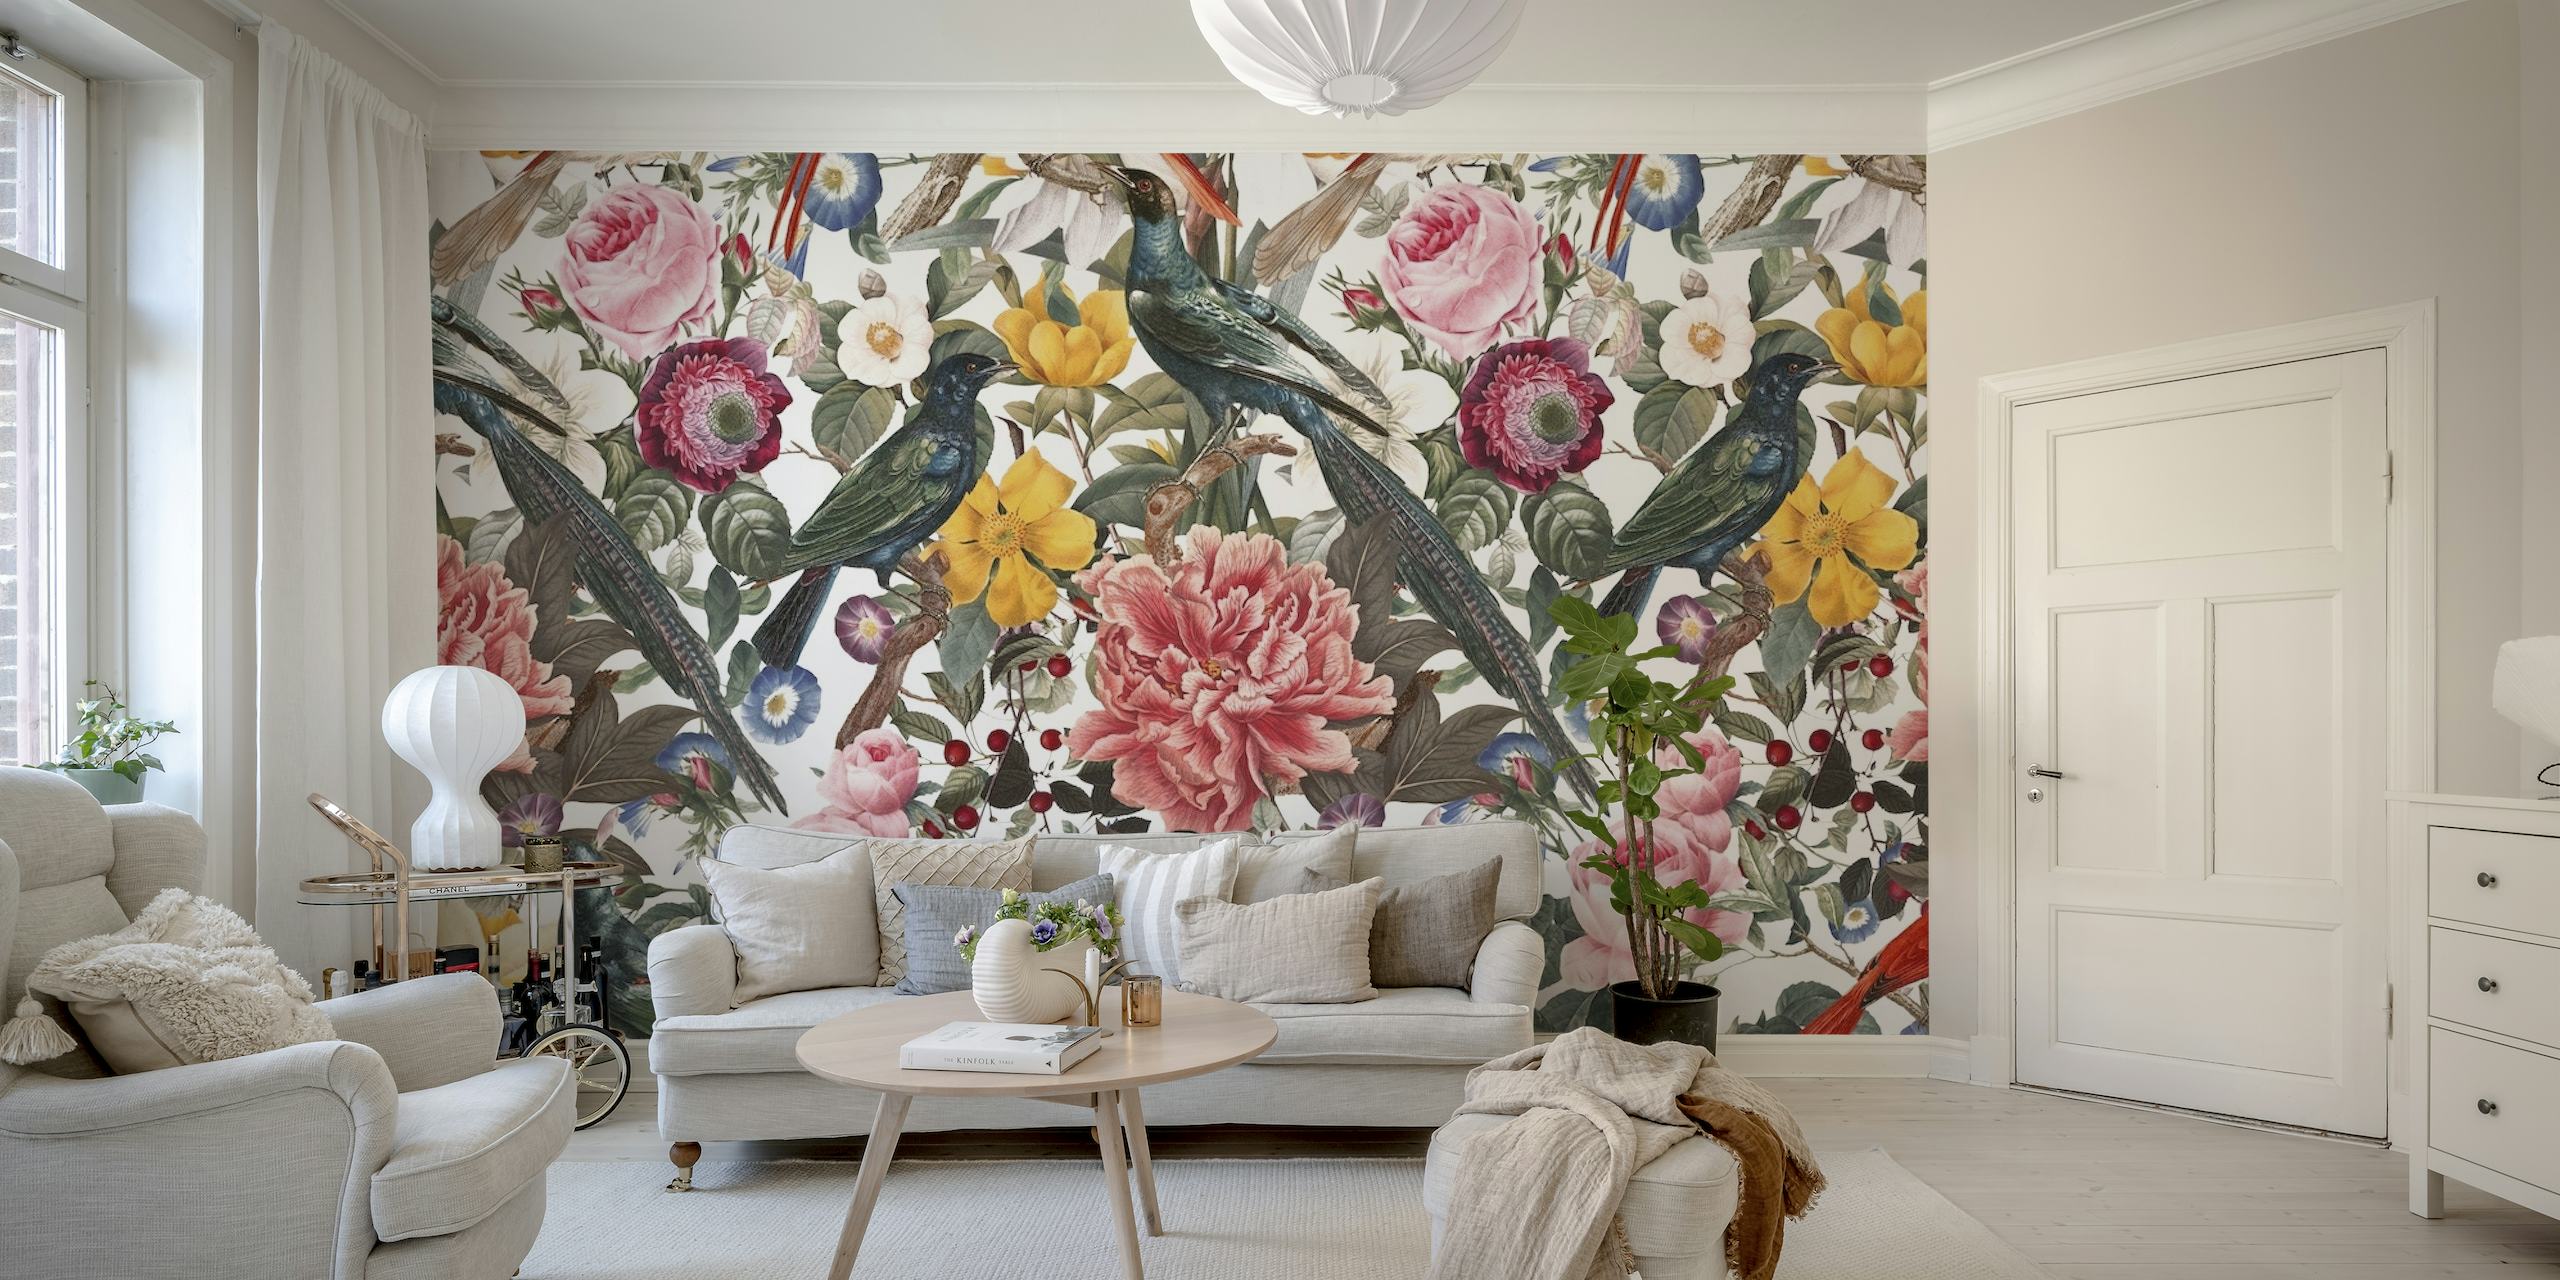 Floral and Birds Wall Mural with lush peonies and playful birds on a muted background